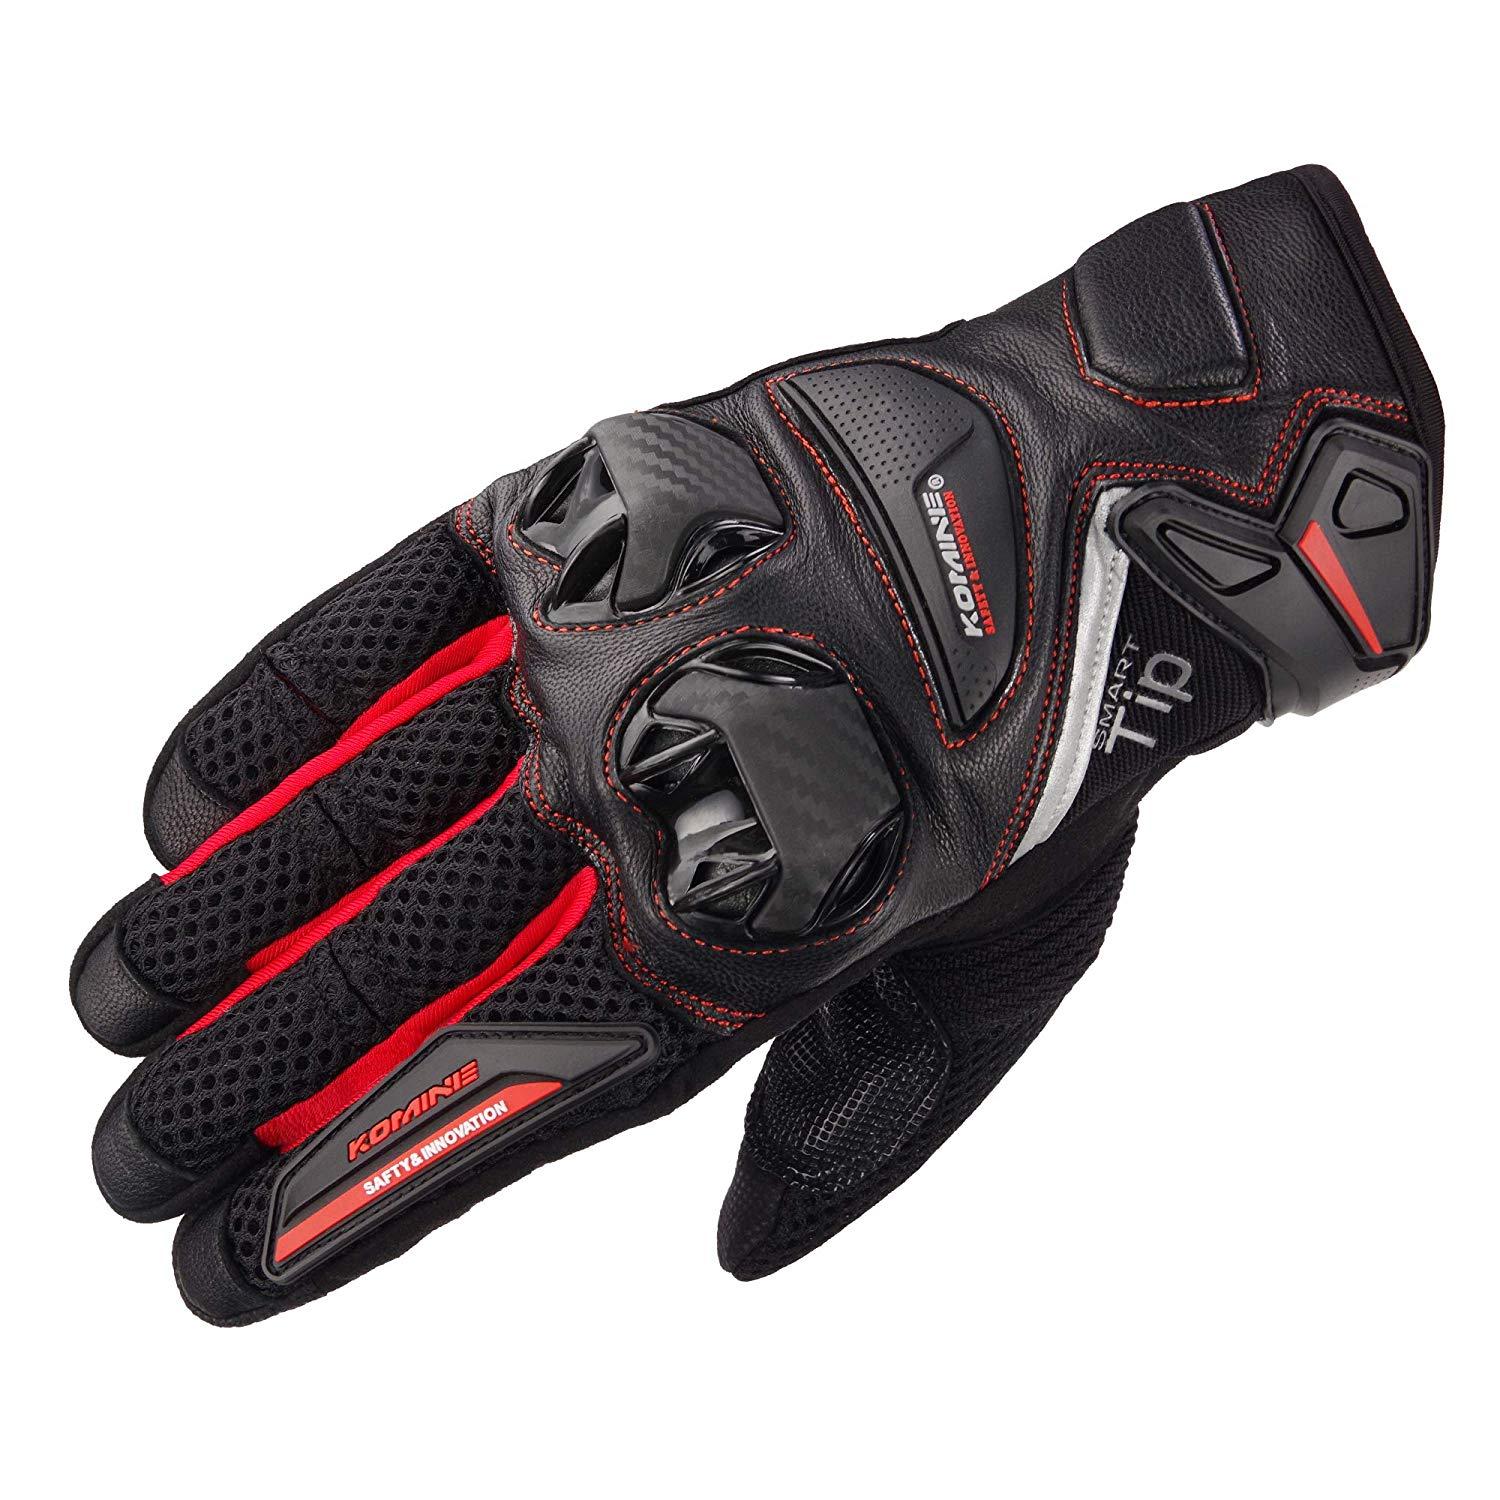 GK-234 Protect Leather M-Gloves Black/Red 3XL i:06-234/BK/RD/3XL